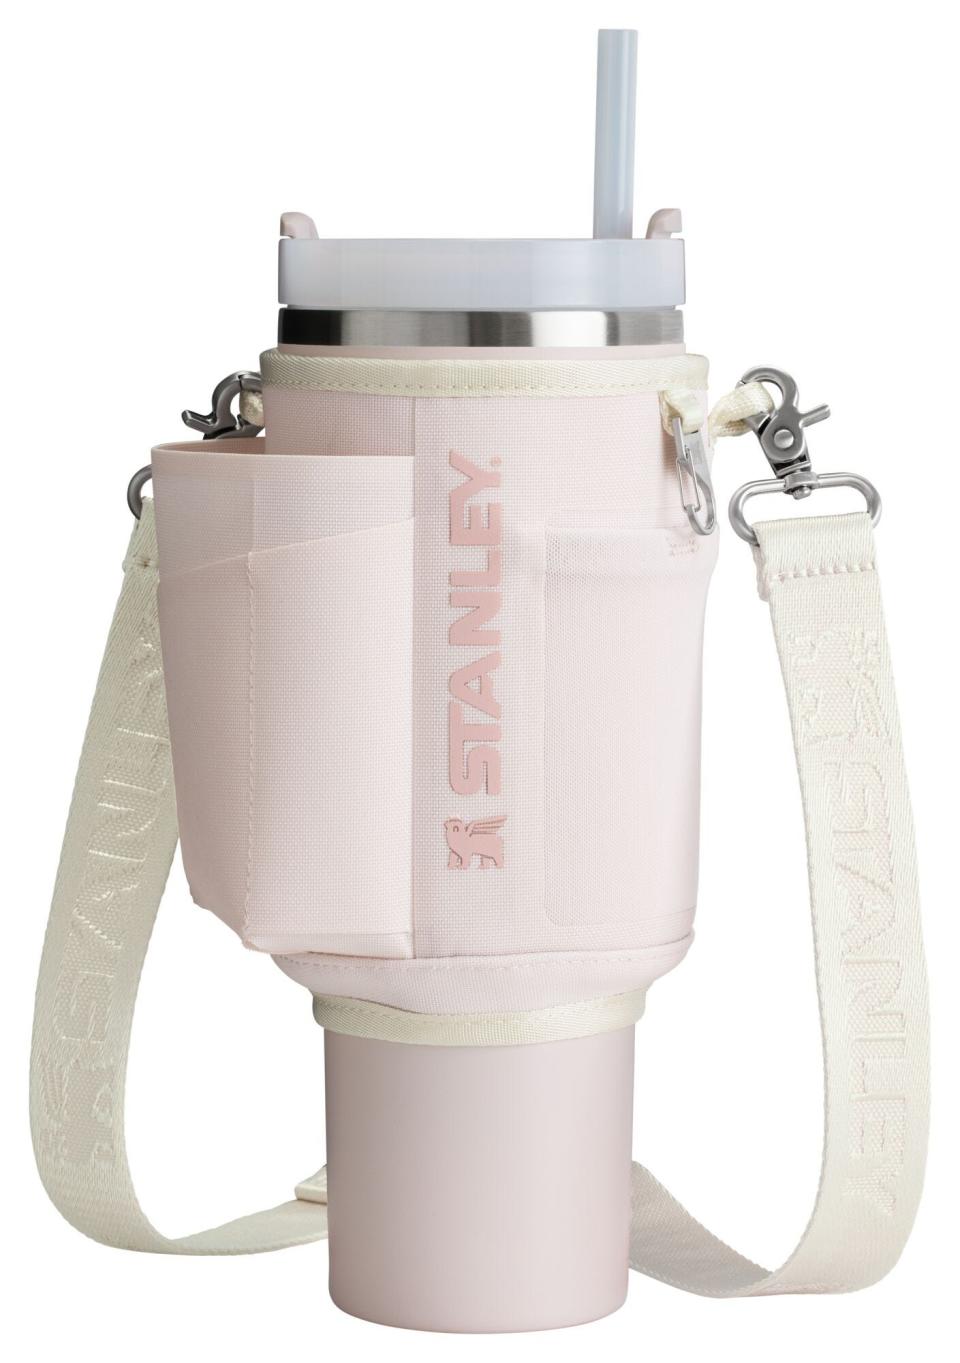 The 40 oz Quencher Carry-All in rose quartz for Stanley's new All Day Collection dropping on April 16.